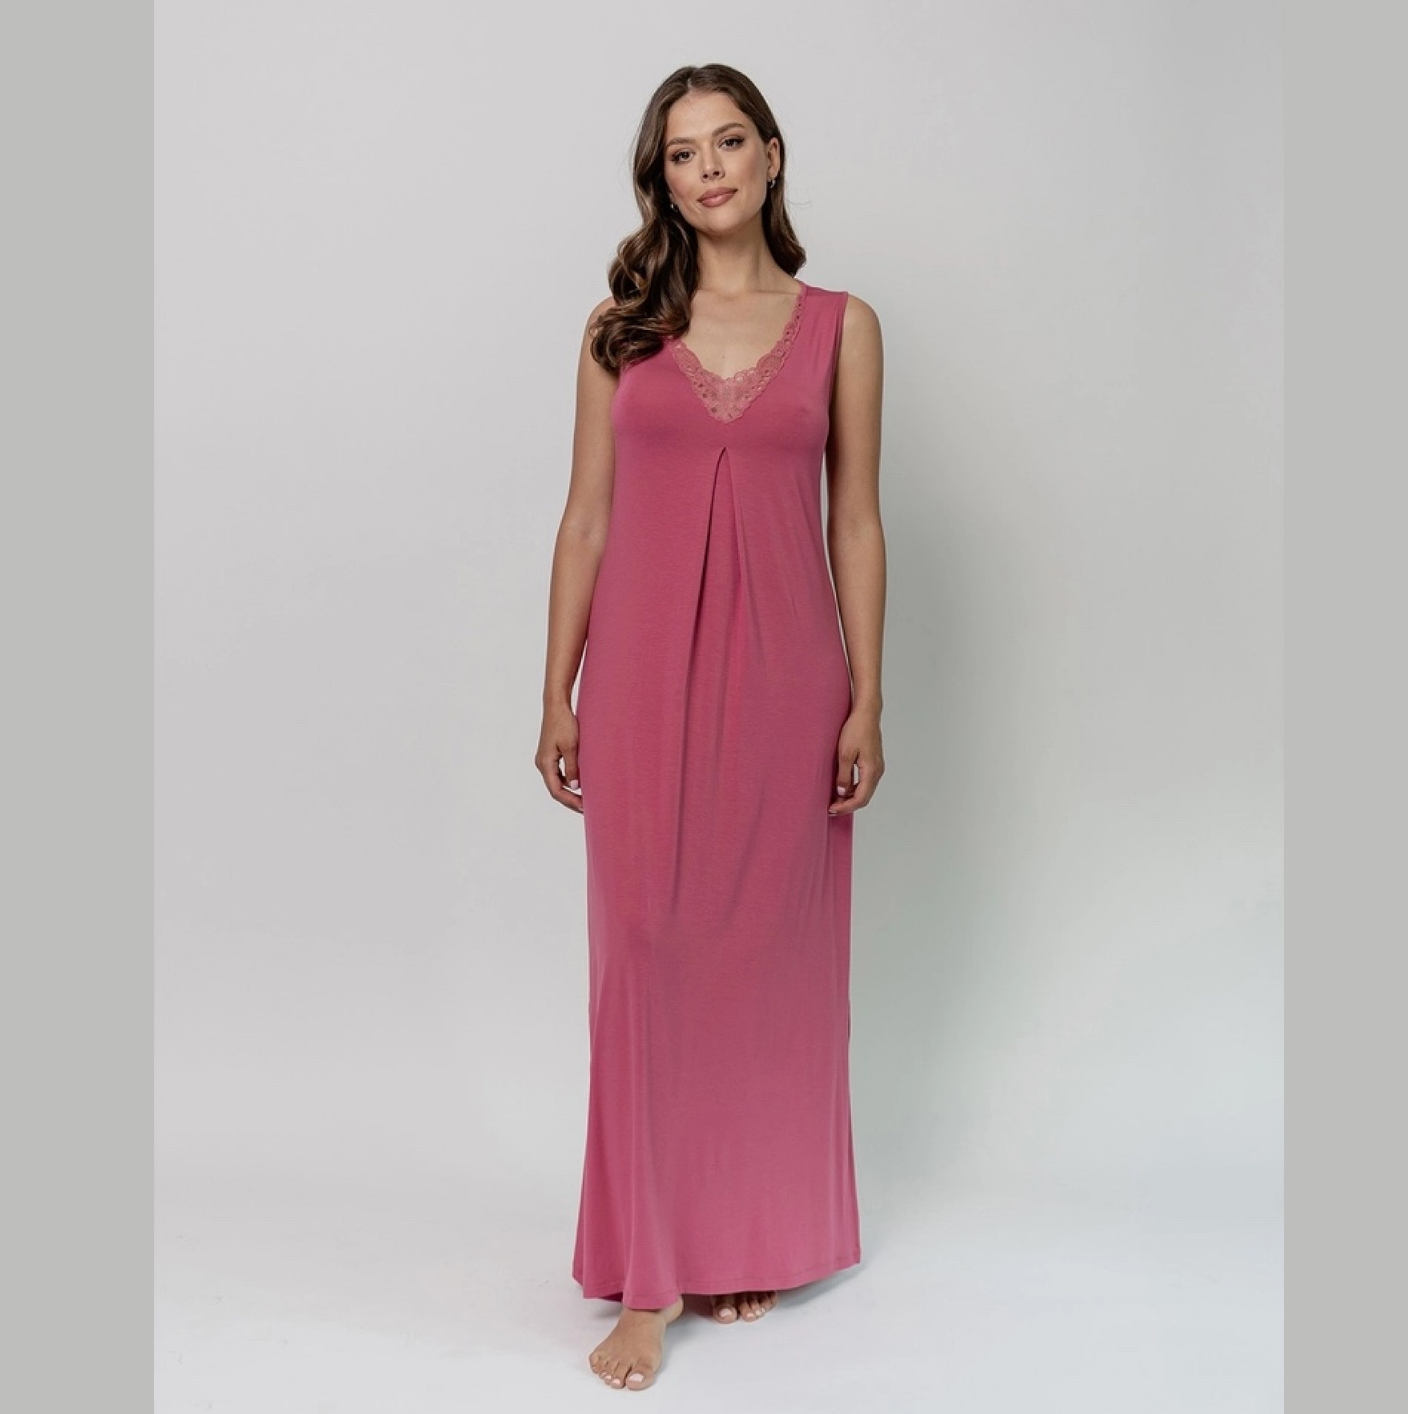 Long Jersey Nightdress with Embroidery at the Neckline - Strawberry